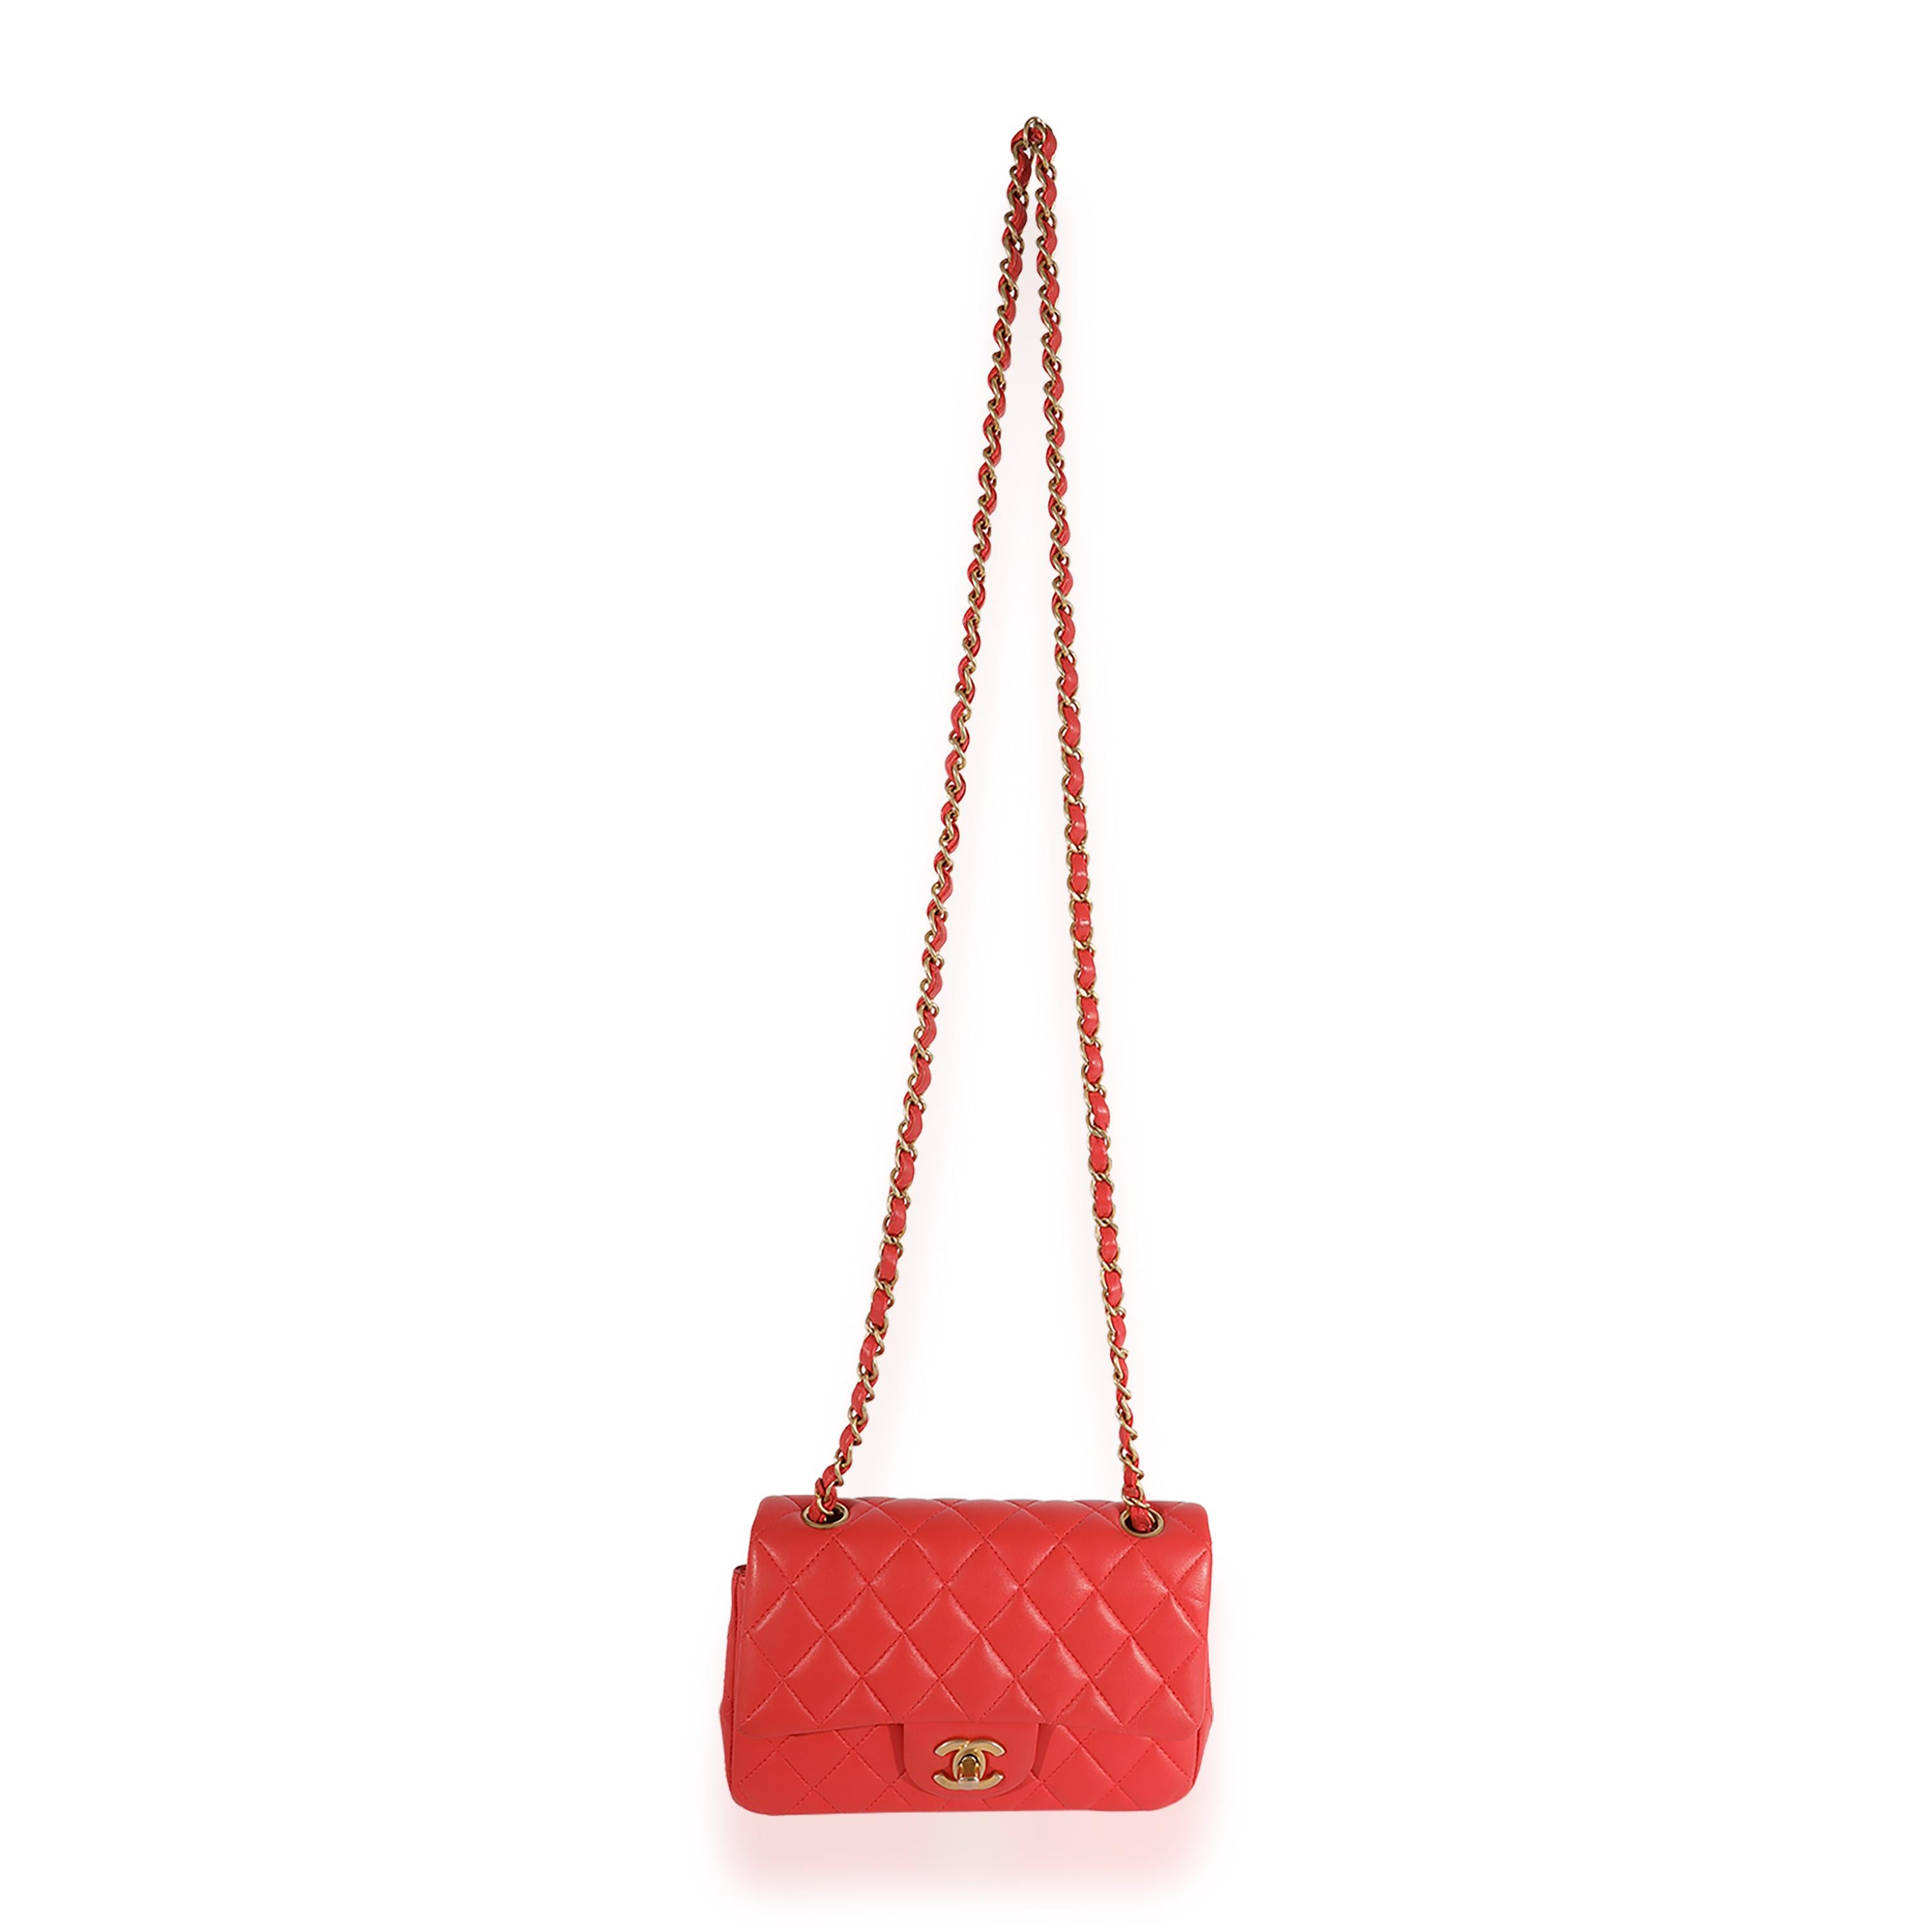 Listing Title: Chanel Coral Quilted Lambskin Mini Rectangular Classic Flap Bag
SKU: 124077
Condition: Pre-owned 
Handbag Condition: Mint
Condition Comments: Plastic at some hardware. Scuffing and discoloration at straps. Faint corner scuffing and